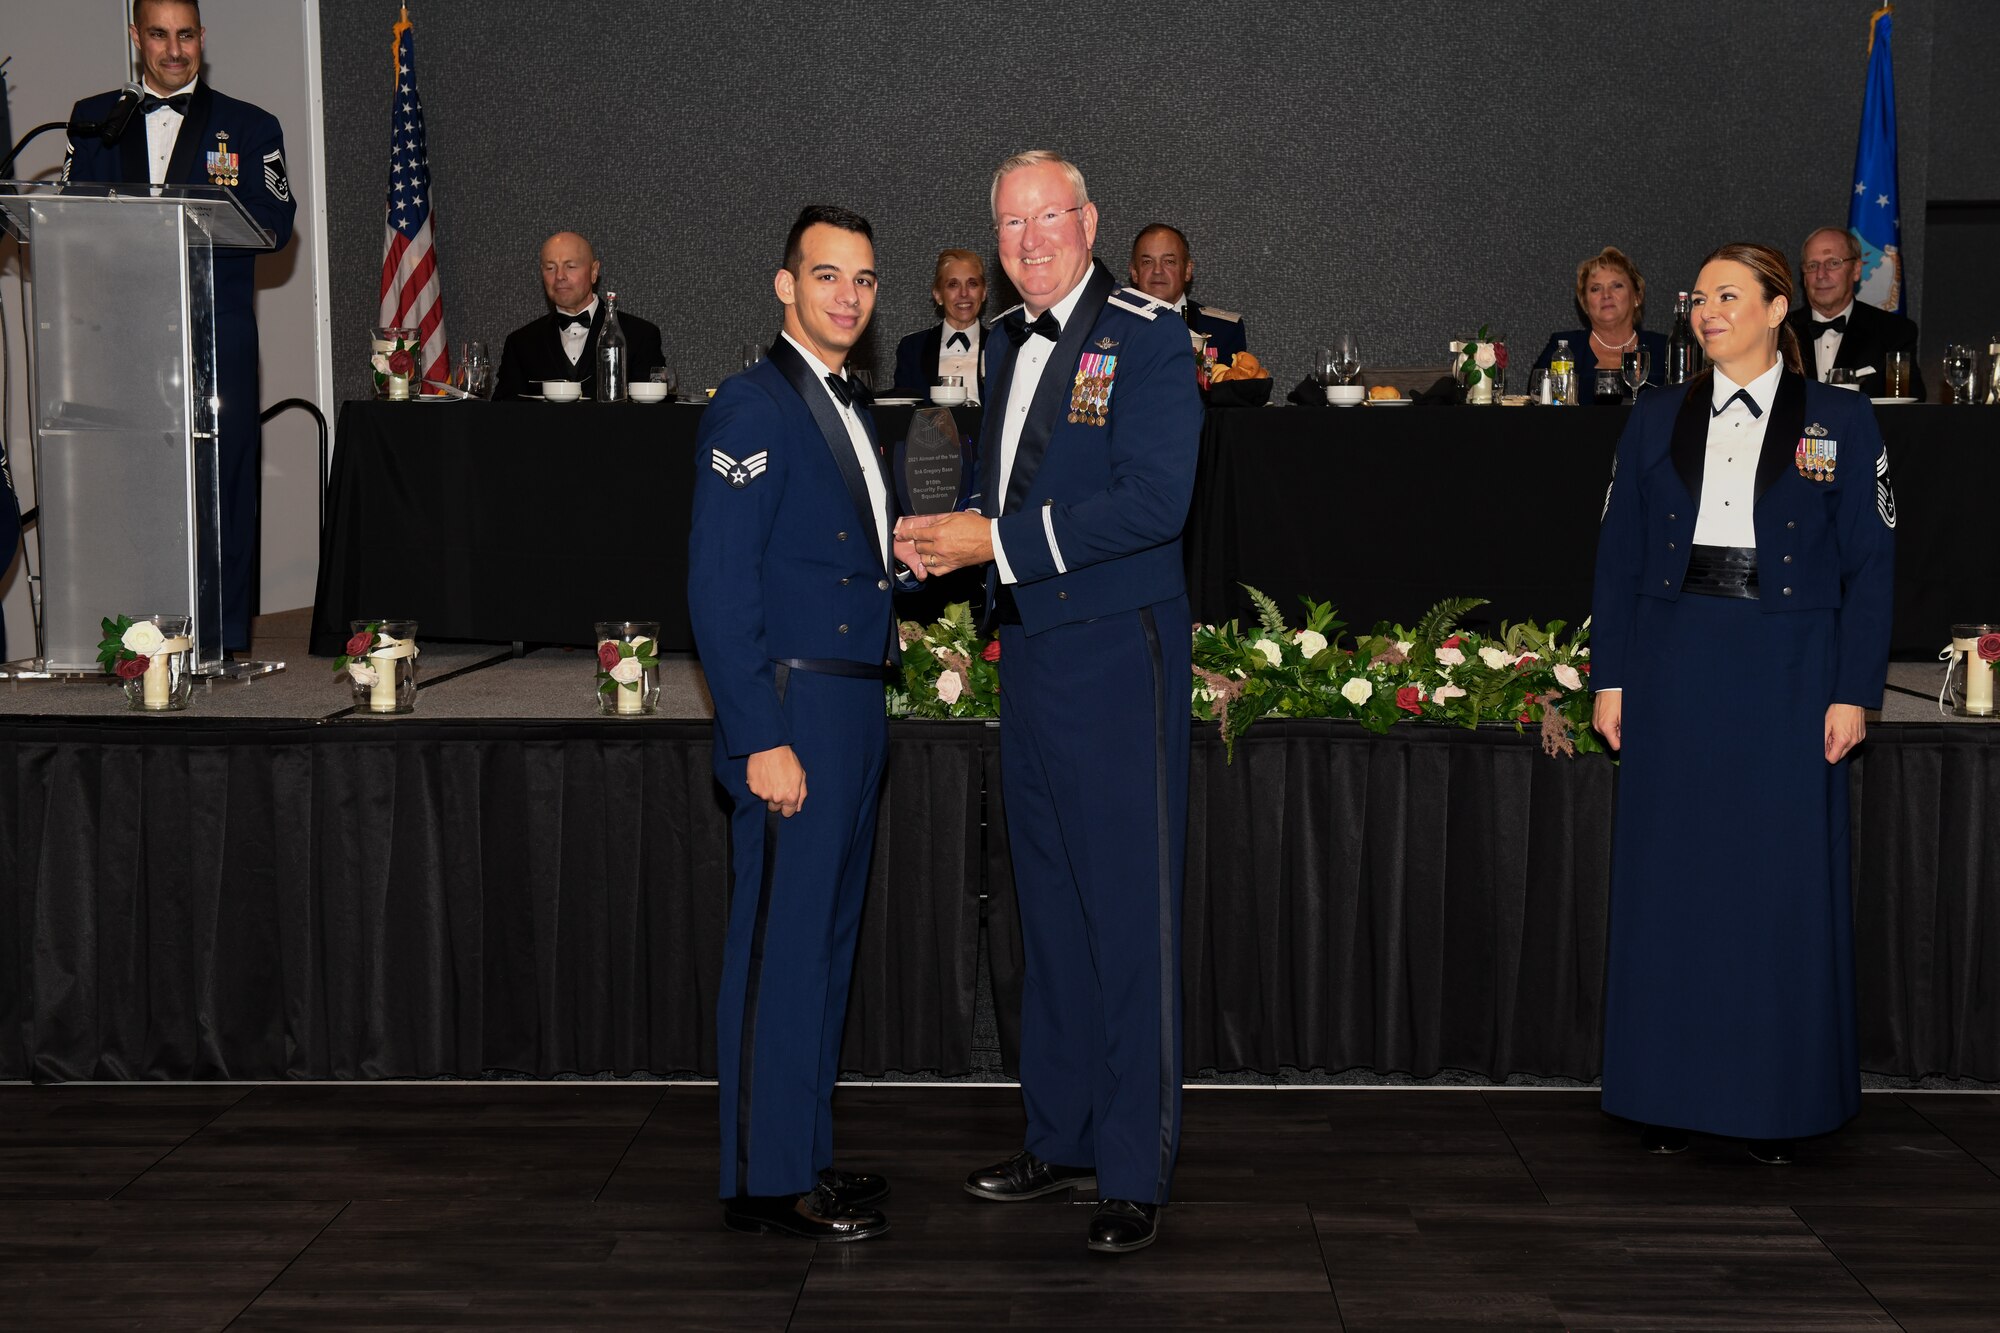 The Youngstown Air Reserve Base Community Council hosted a ball in partnership with the 910th Airlift Wing to honor the 75th birthday of the U.S. Air Force.